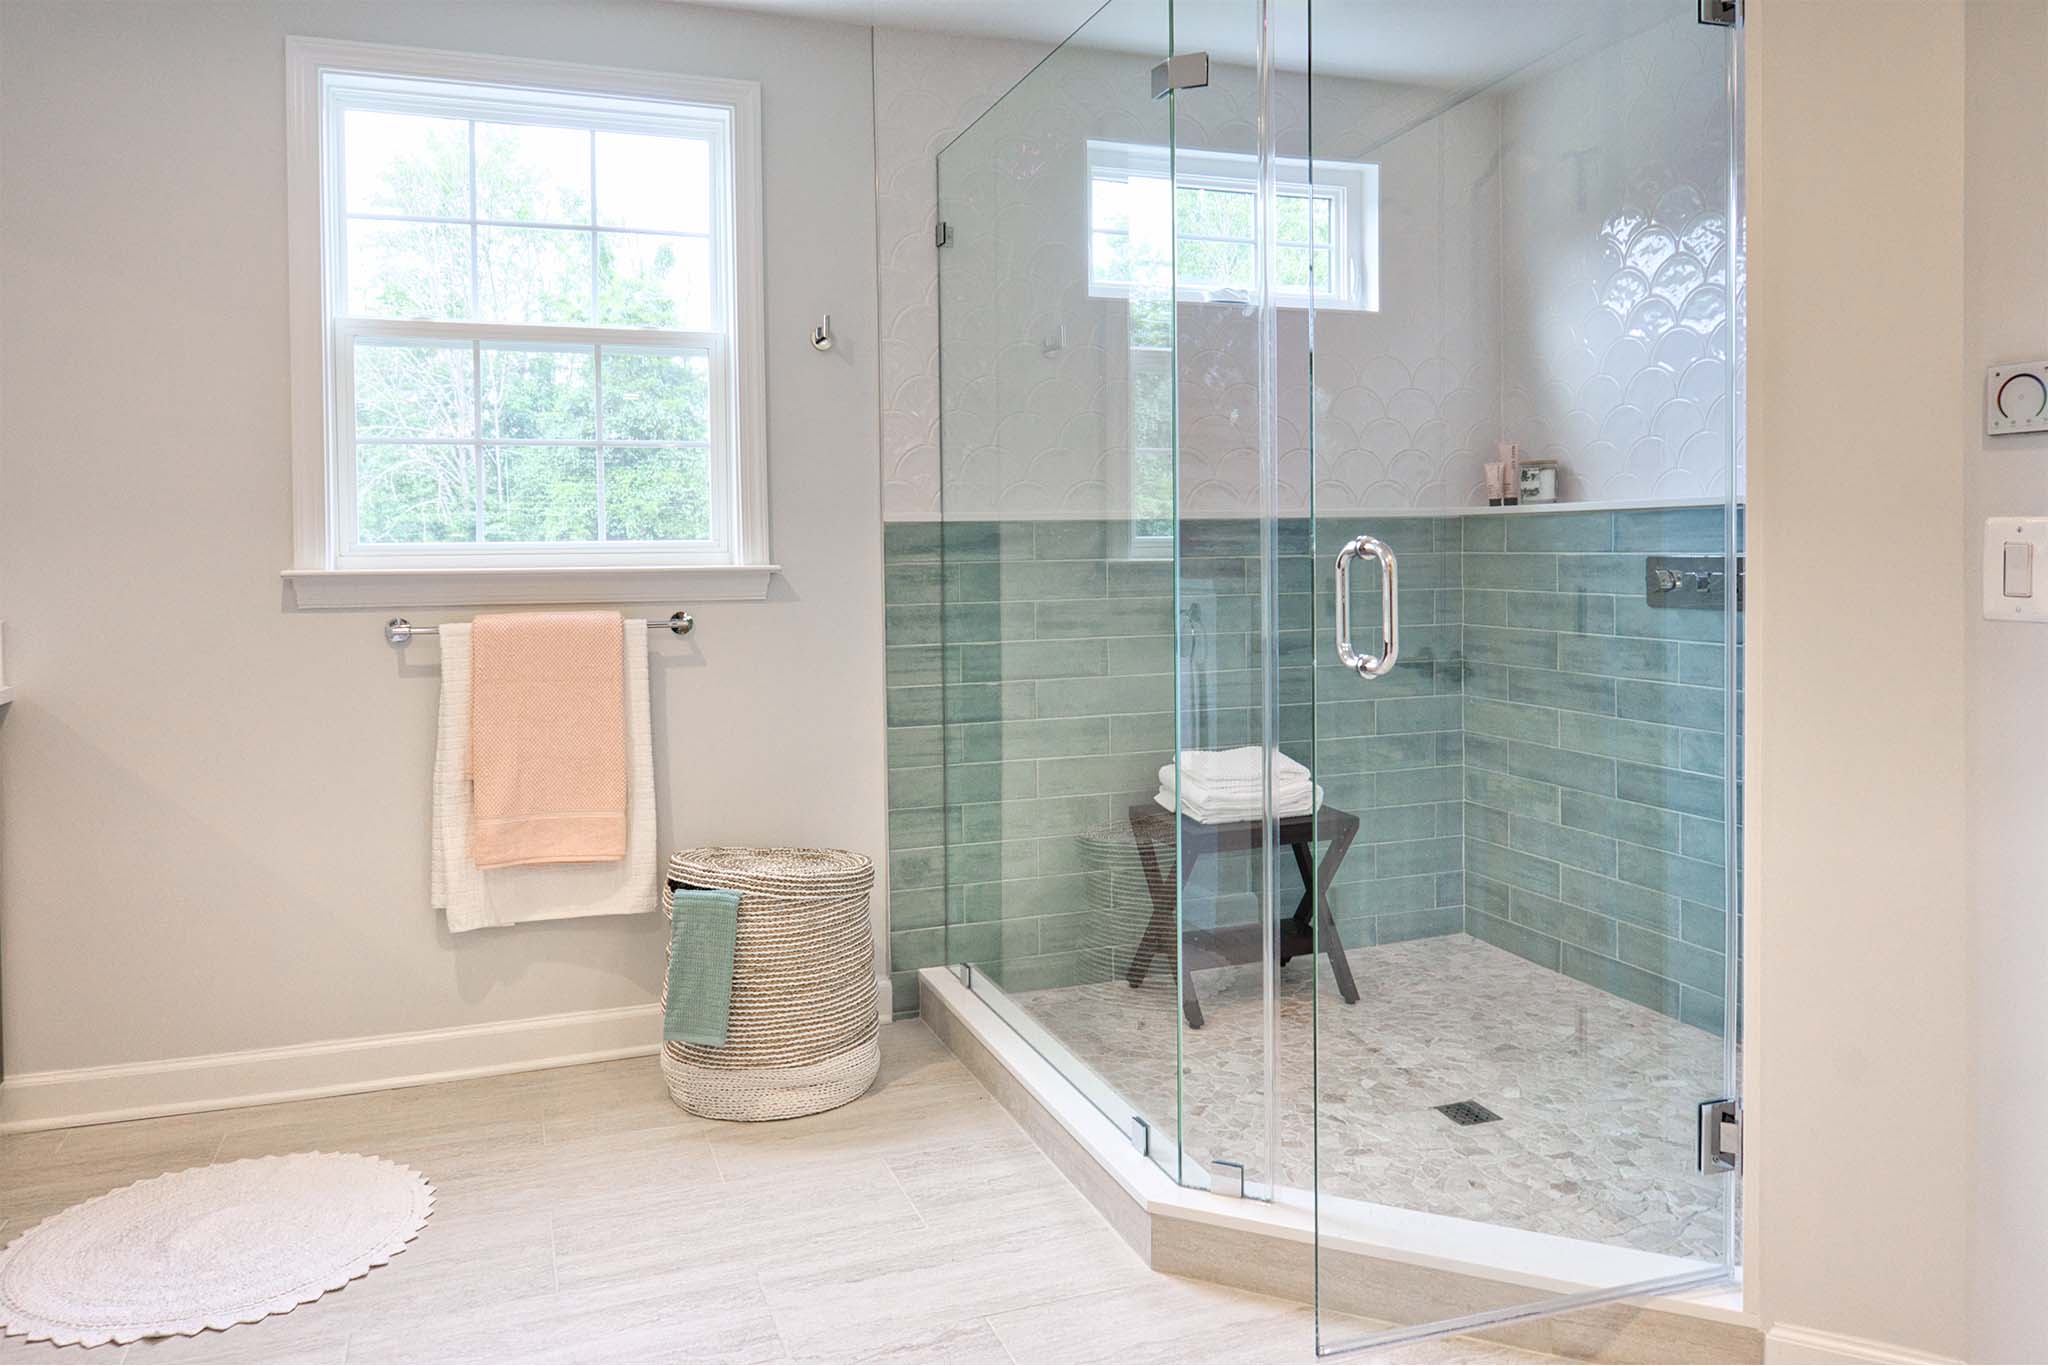 Bathroom Remodeling in Northeast Tacoma